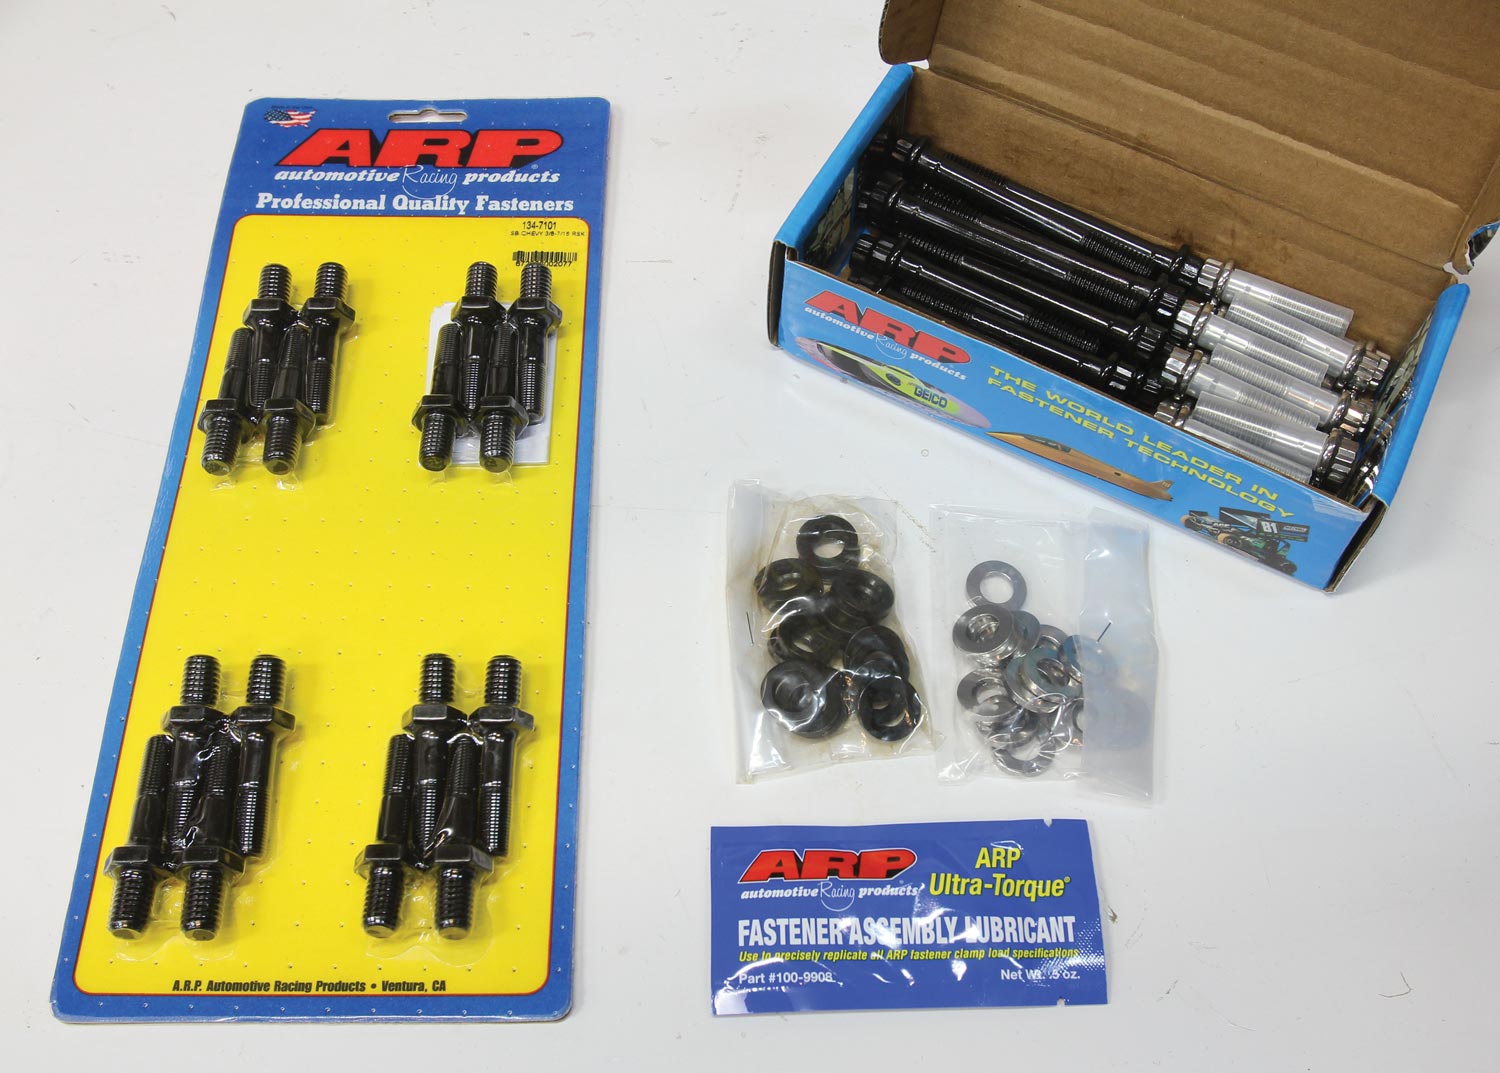 Automotive Racing Products cylinder head bolt kit (PN 134-3703), rocker arm studs (PN 134-7101), and Comp Cams pushrod guides (Summit PN CCA-4808-8)